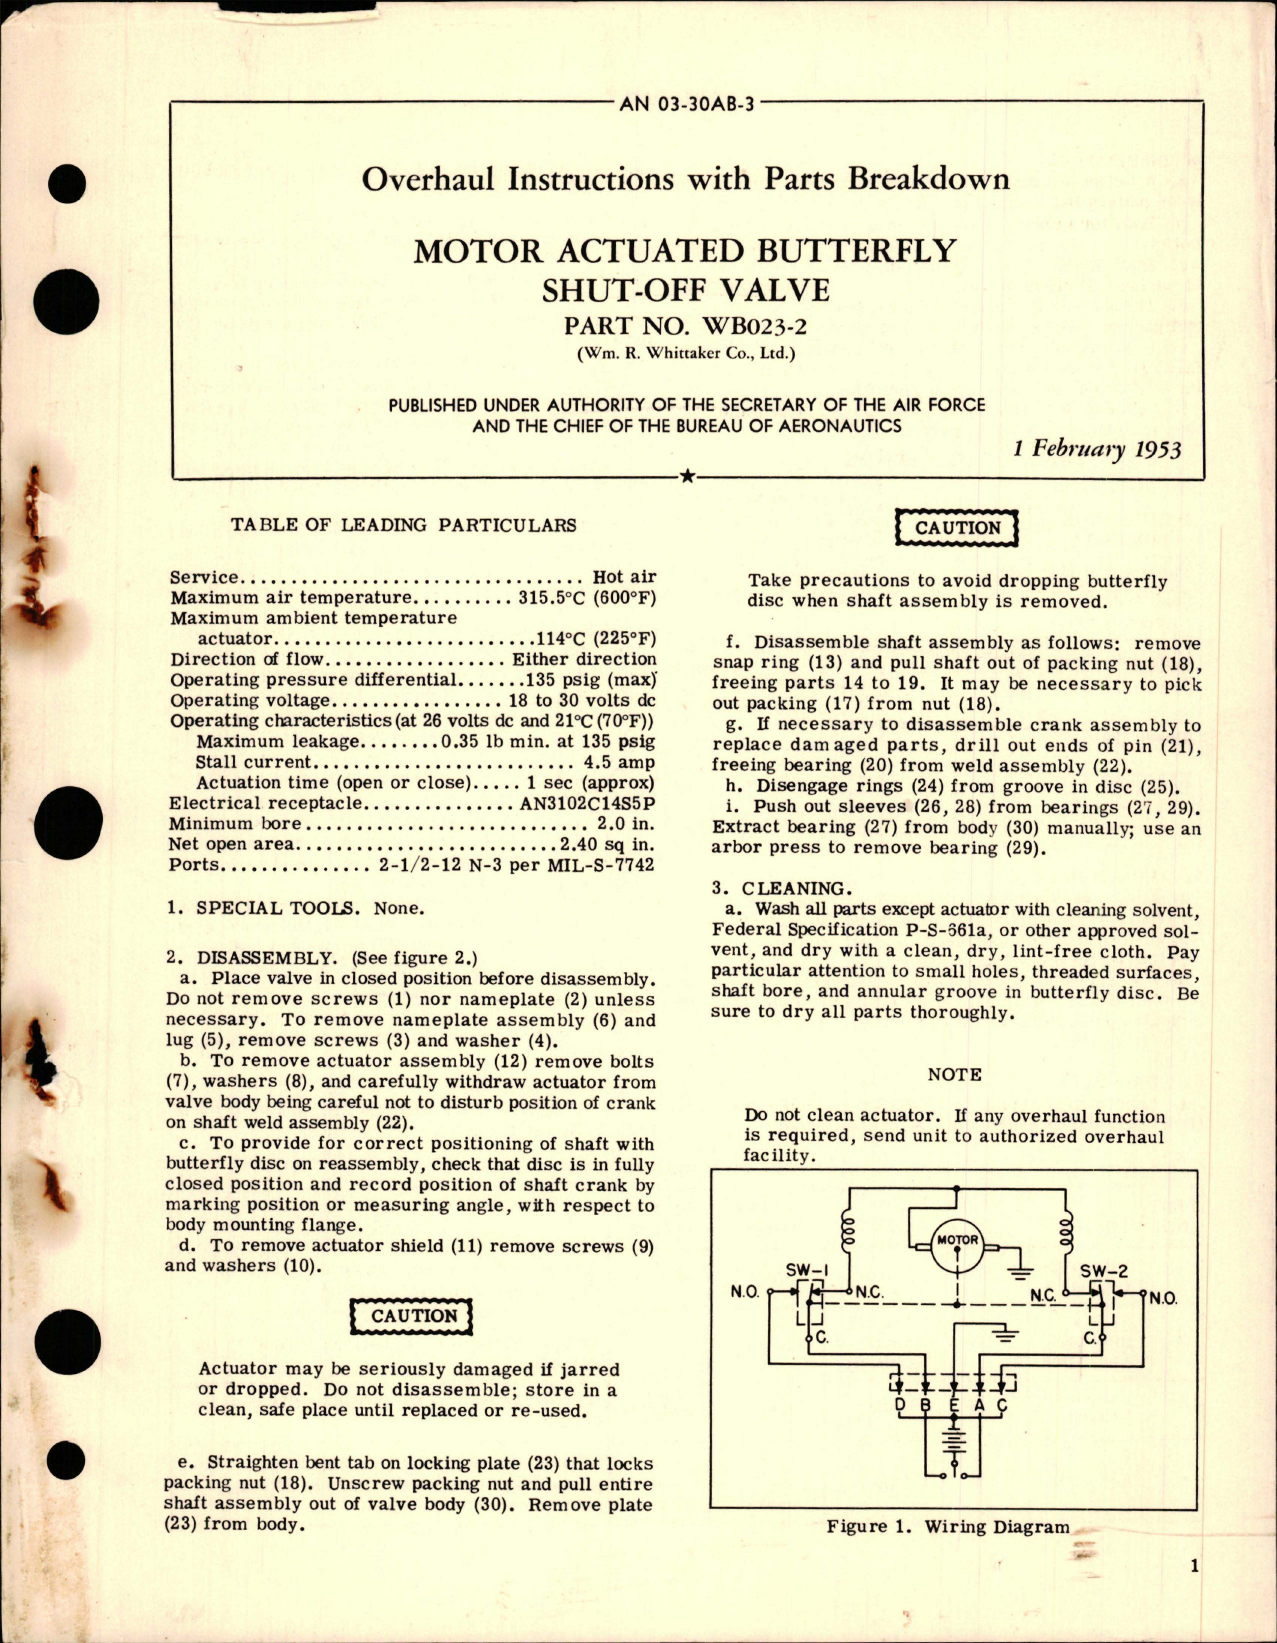 Sample page 1 from AirCorps Library document: Overhaul Instructions with Parts Breakdown for Motor Actuated Butterfly Shut-Off Valve - Part WB023-2 